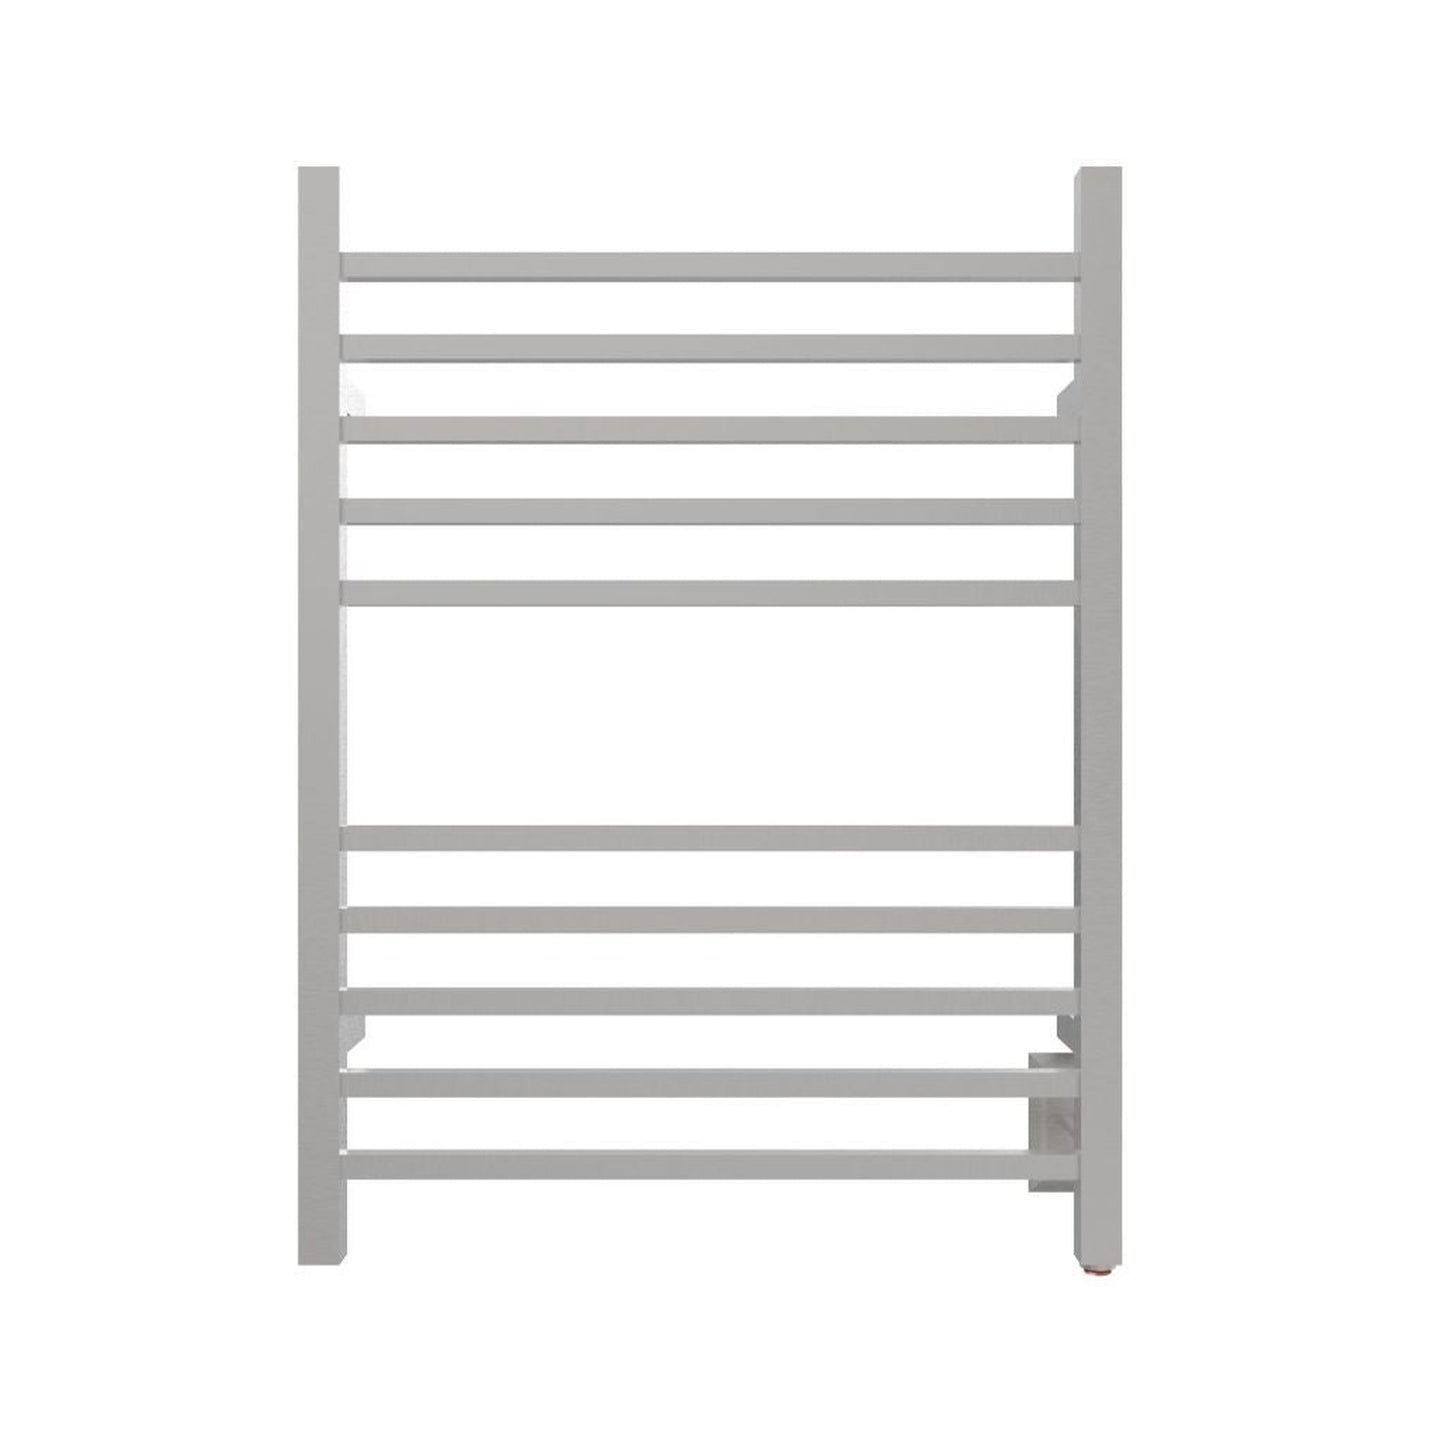 Amba Radiant Square 10-Bar Brushed Stainless Steel Hardwired Towel Warmer